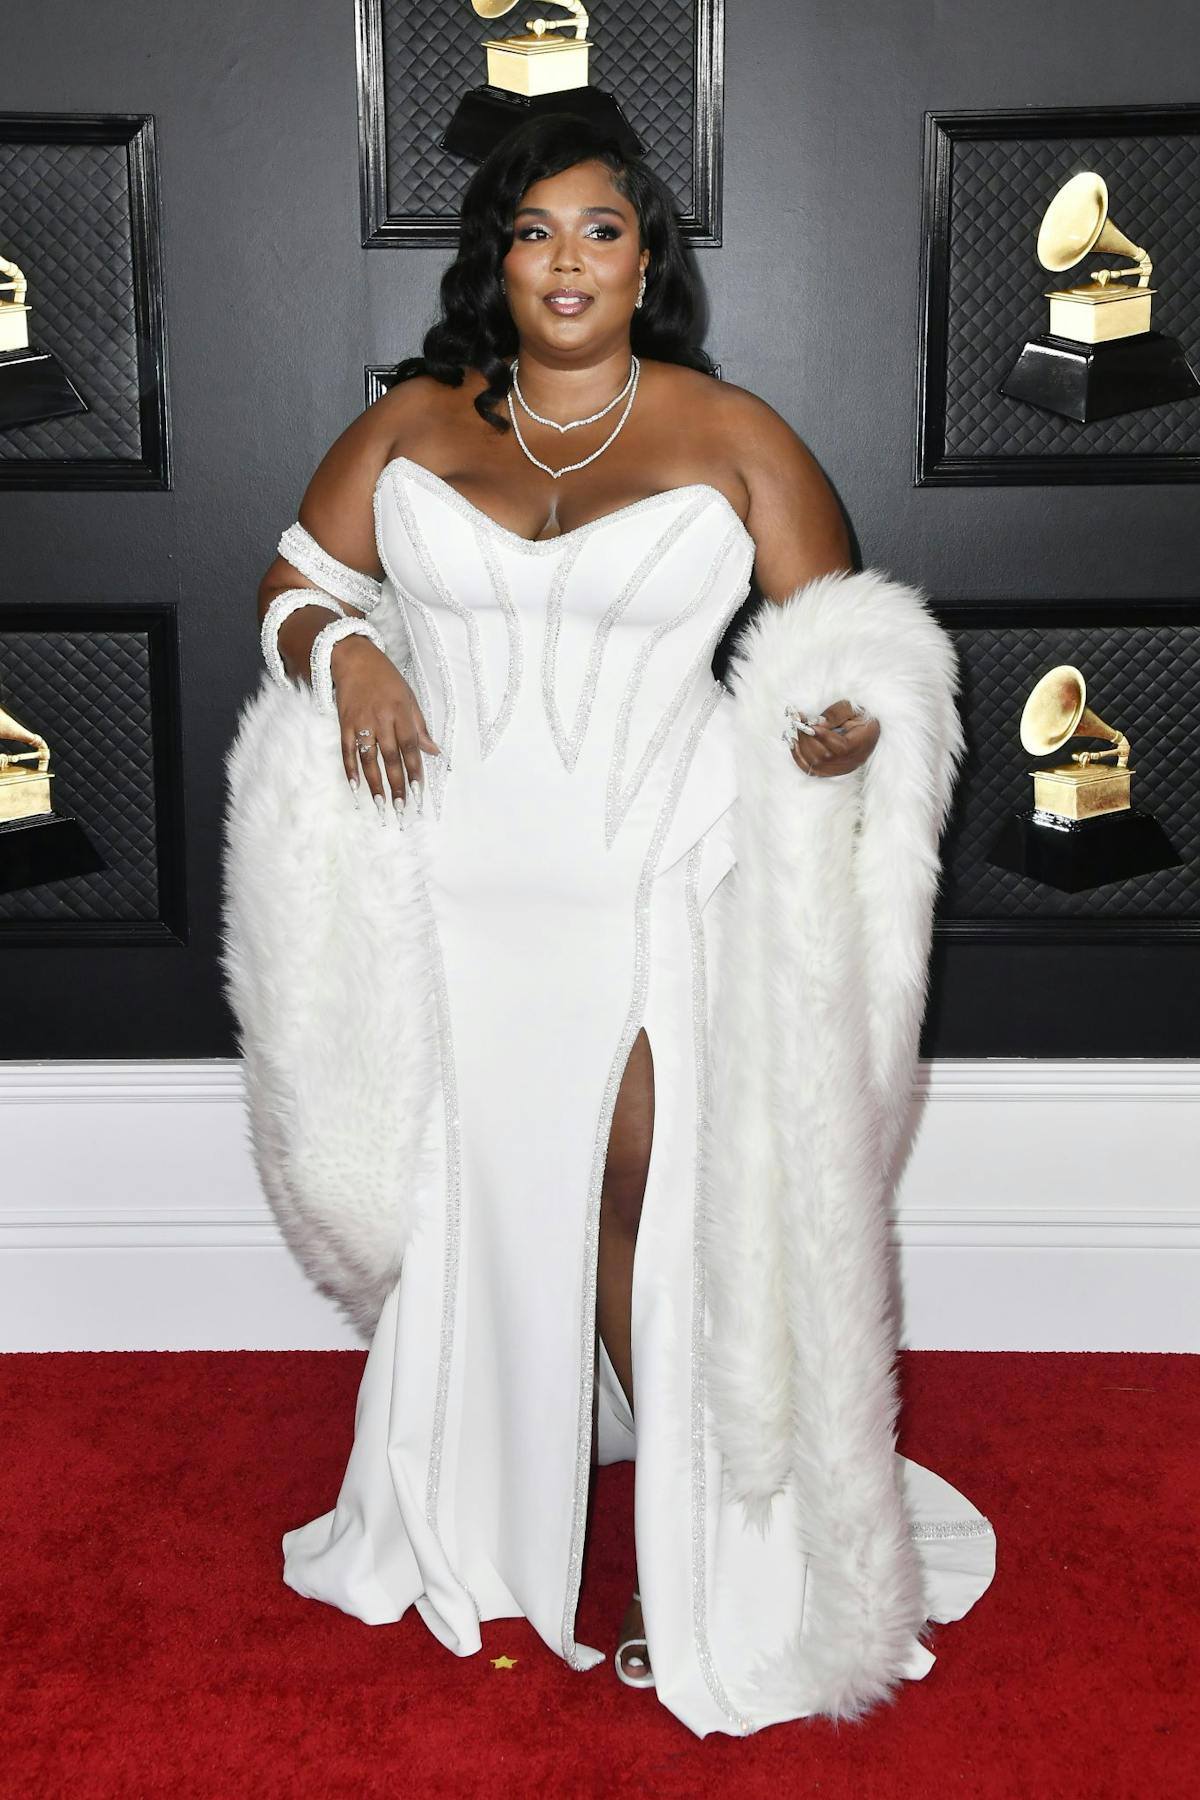 Grammys 2020: All the best red carpet looks